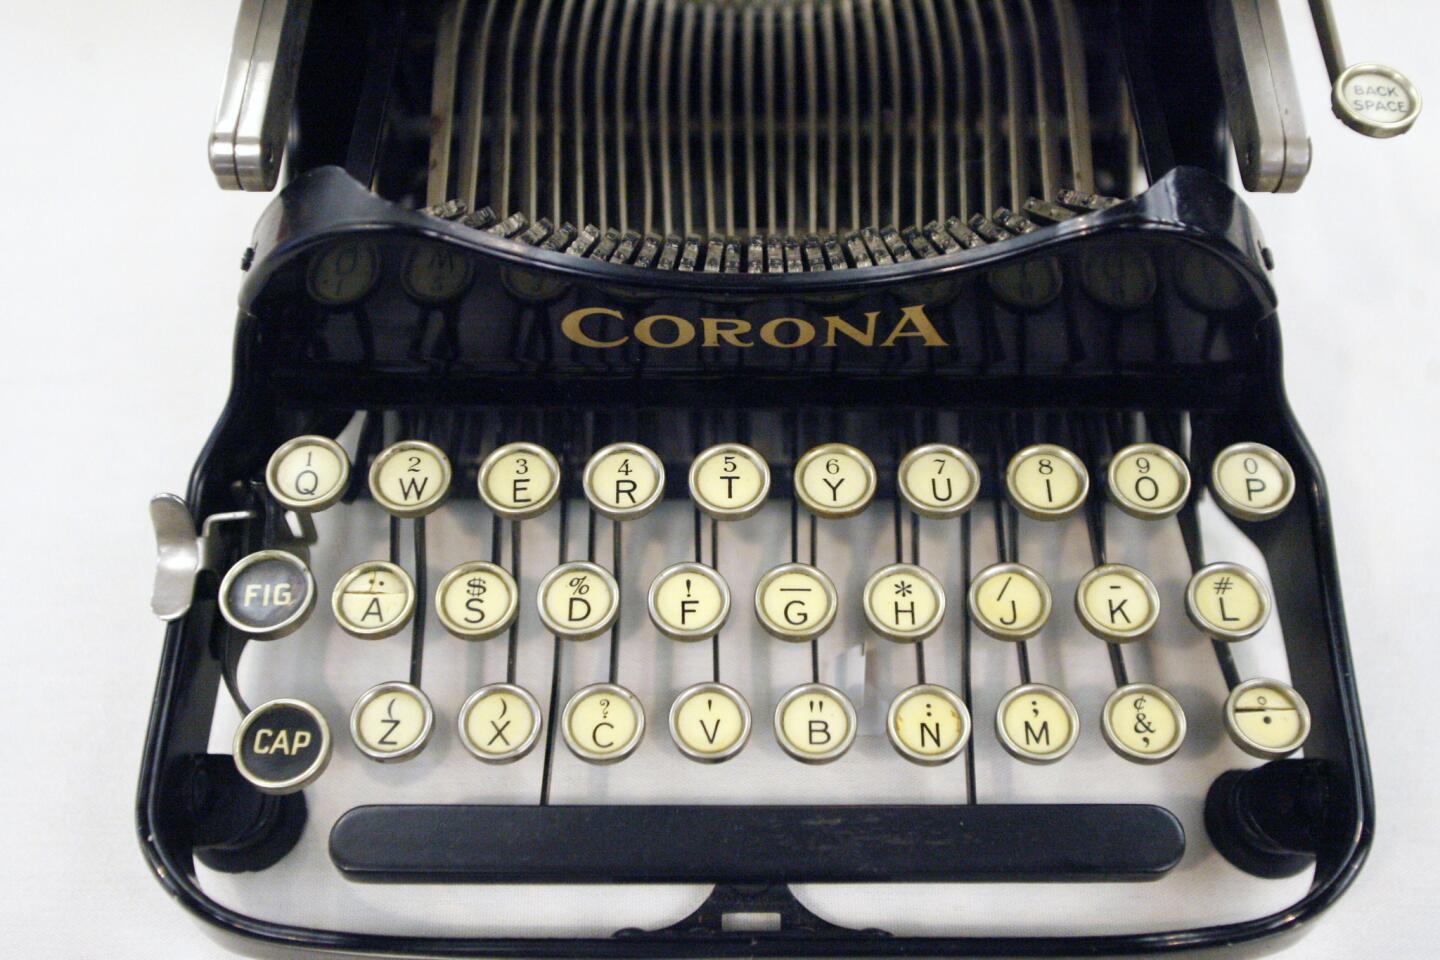 A 1971 Corona typewriter was displayed during Anderson Business Technologies' 100th anniversary, which took placeat the University Club of Pasadena on Thursday, October 11, 2012.